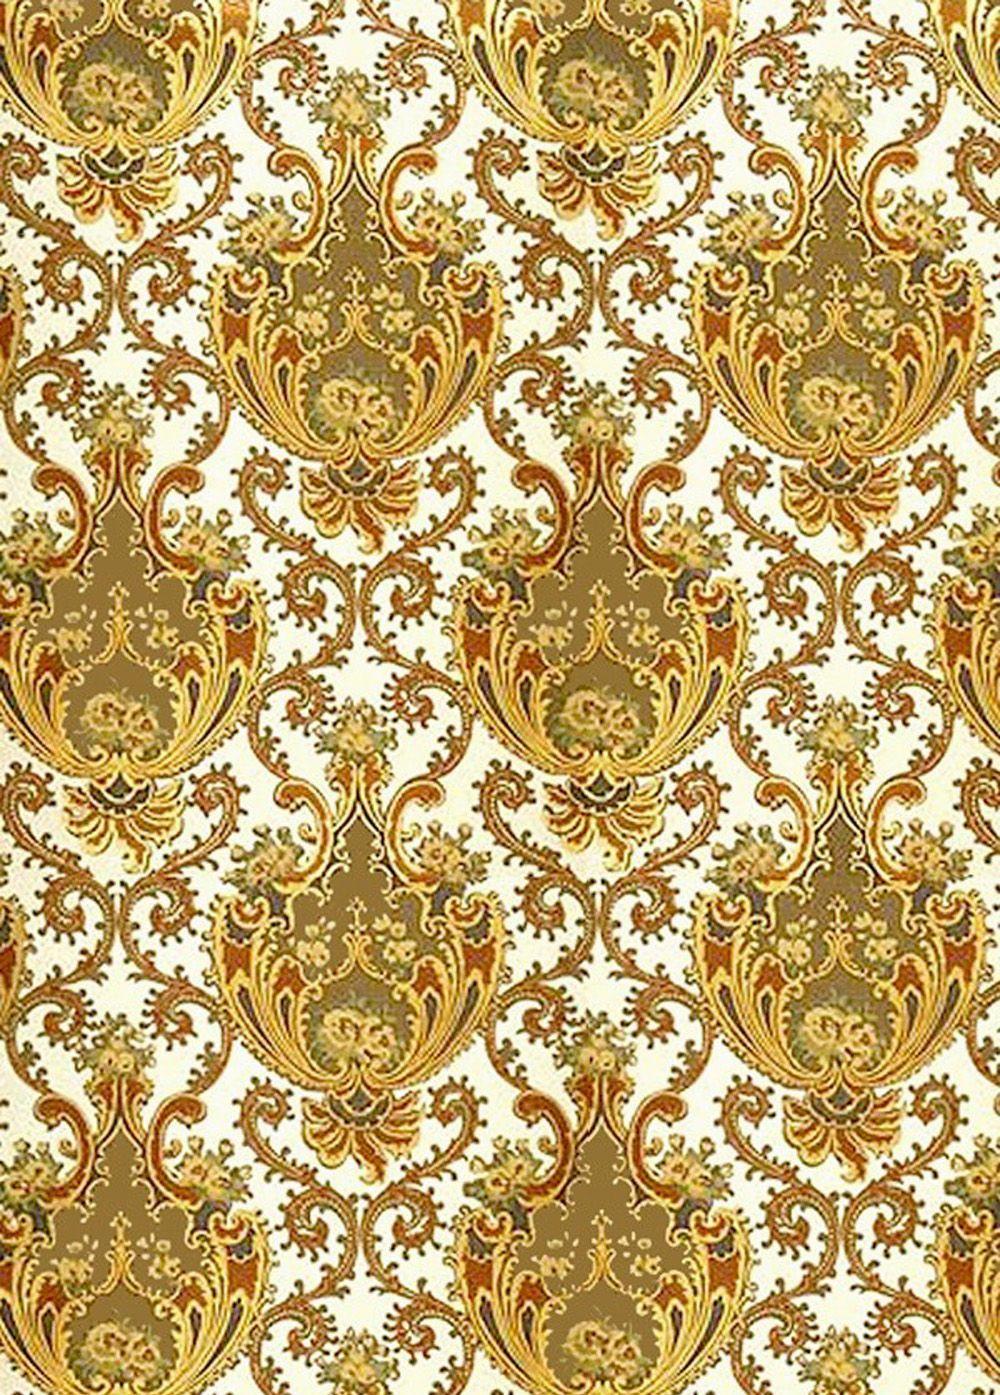 Rococo wallpaper. The emphasis in this wallpaper is clearly on